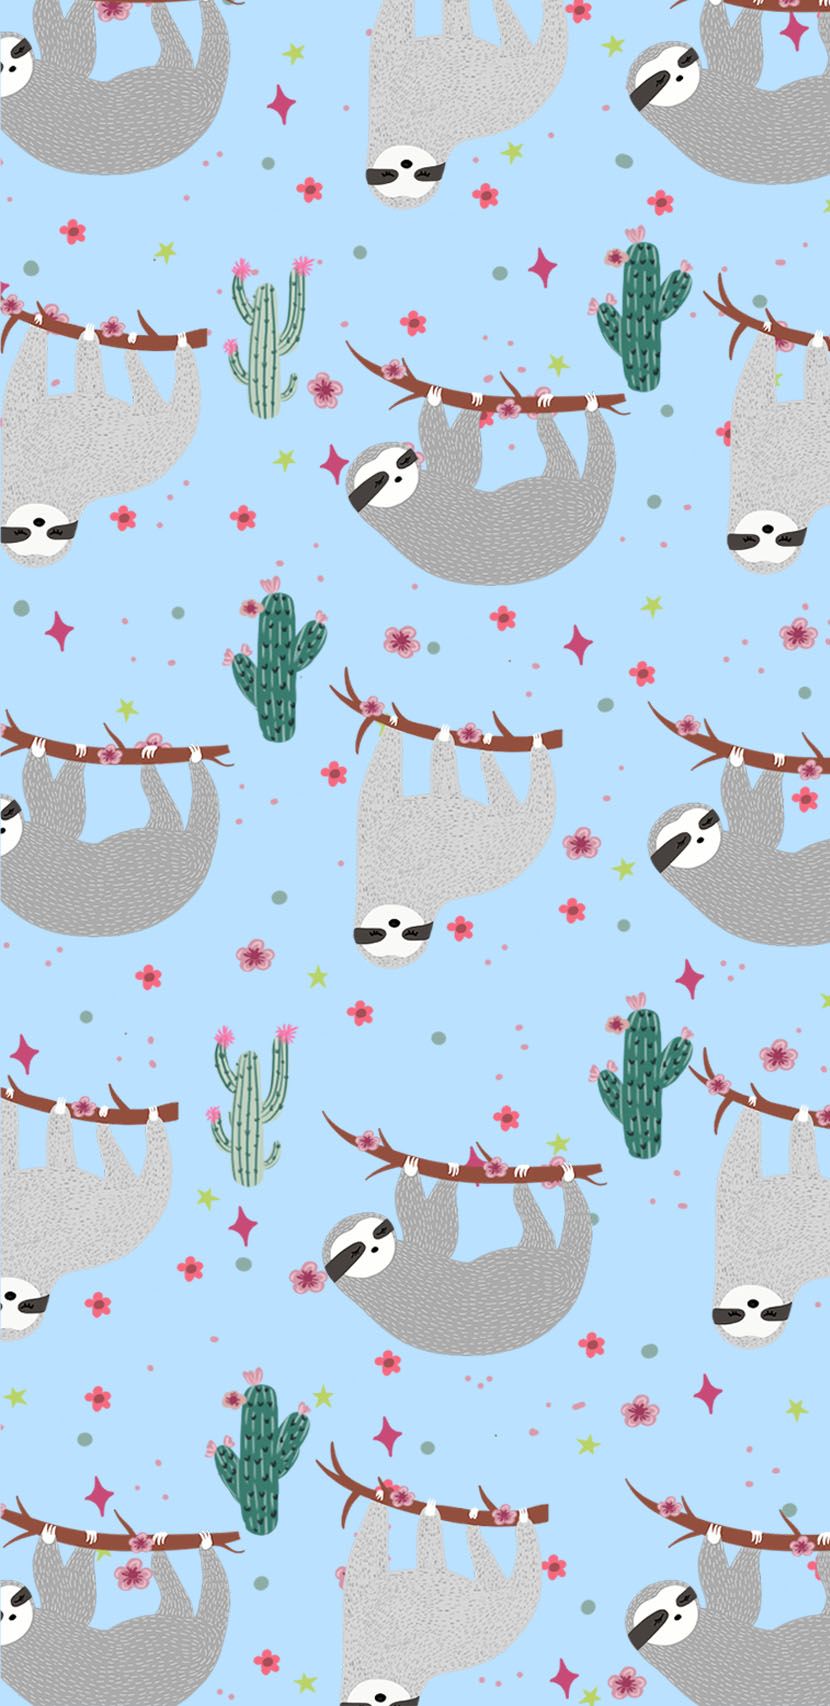 For all the sloth lovers out there!. iPhone wallpaper pattern, Cute patterns wallpaper, iPhone wallpaper